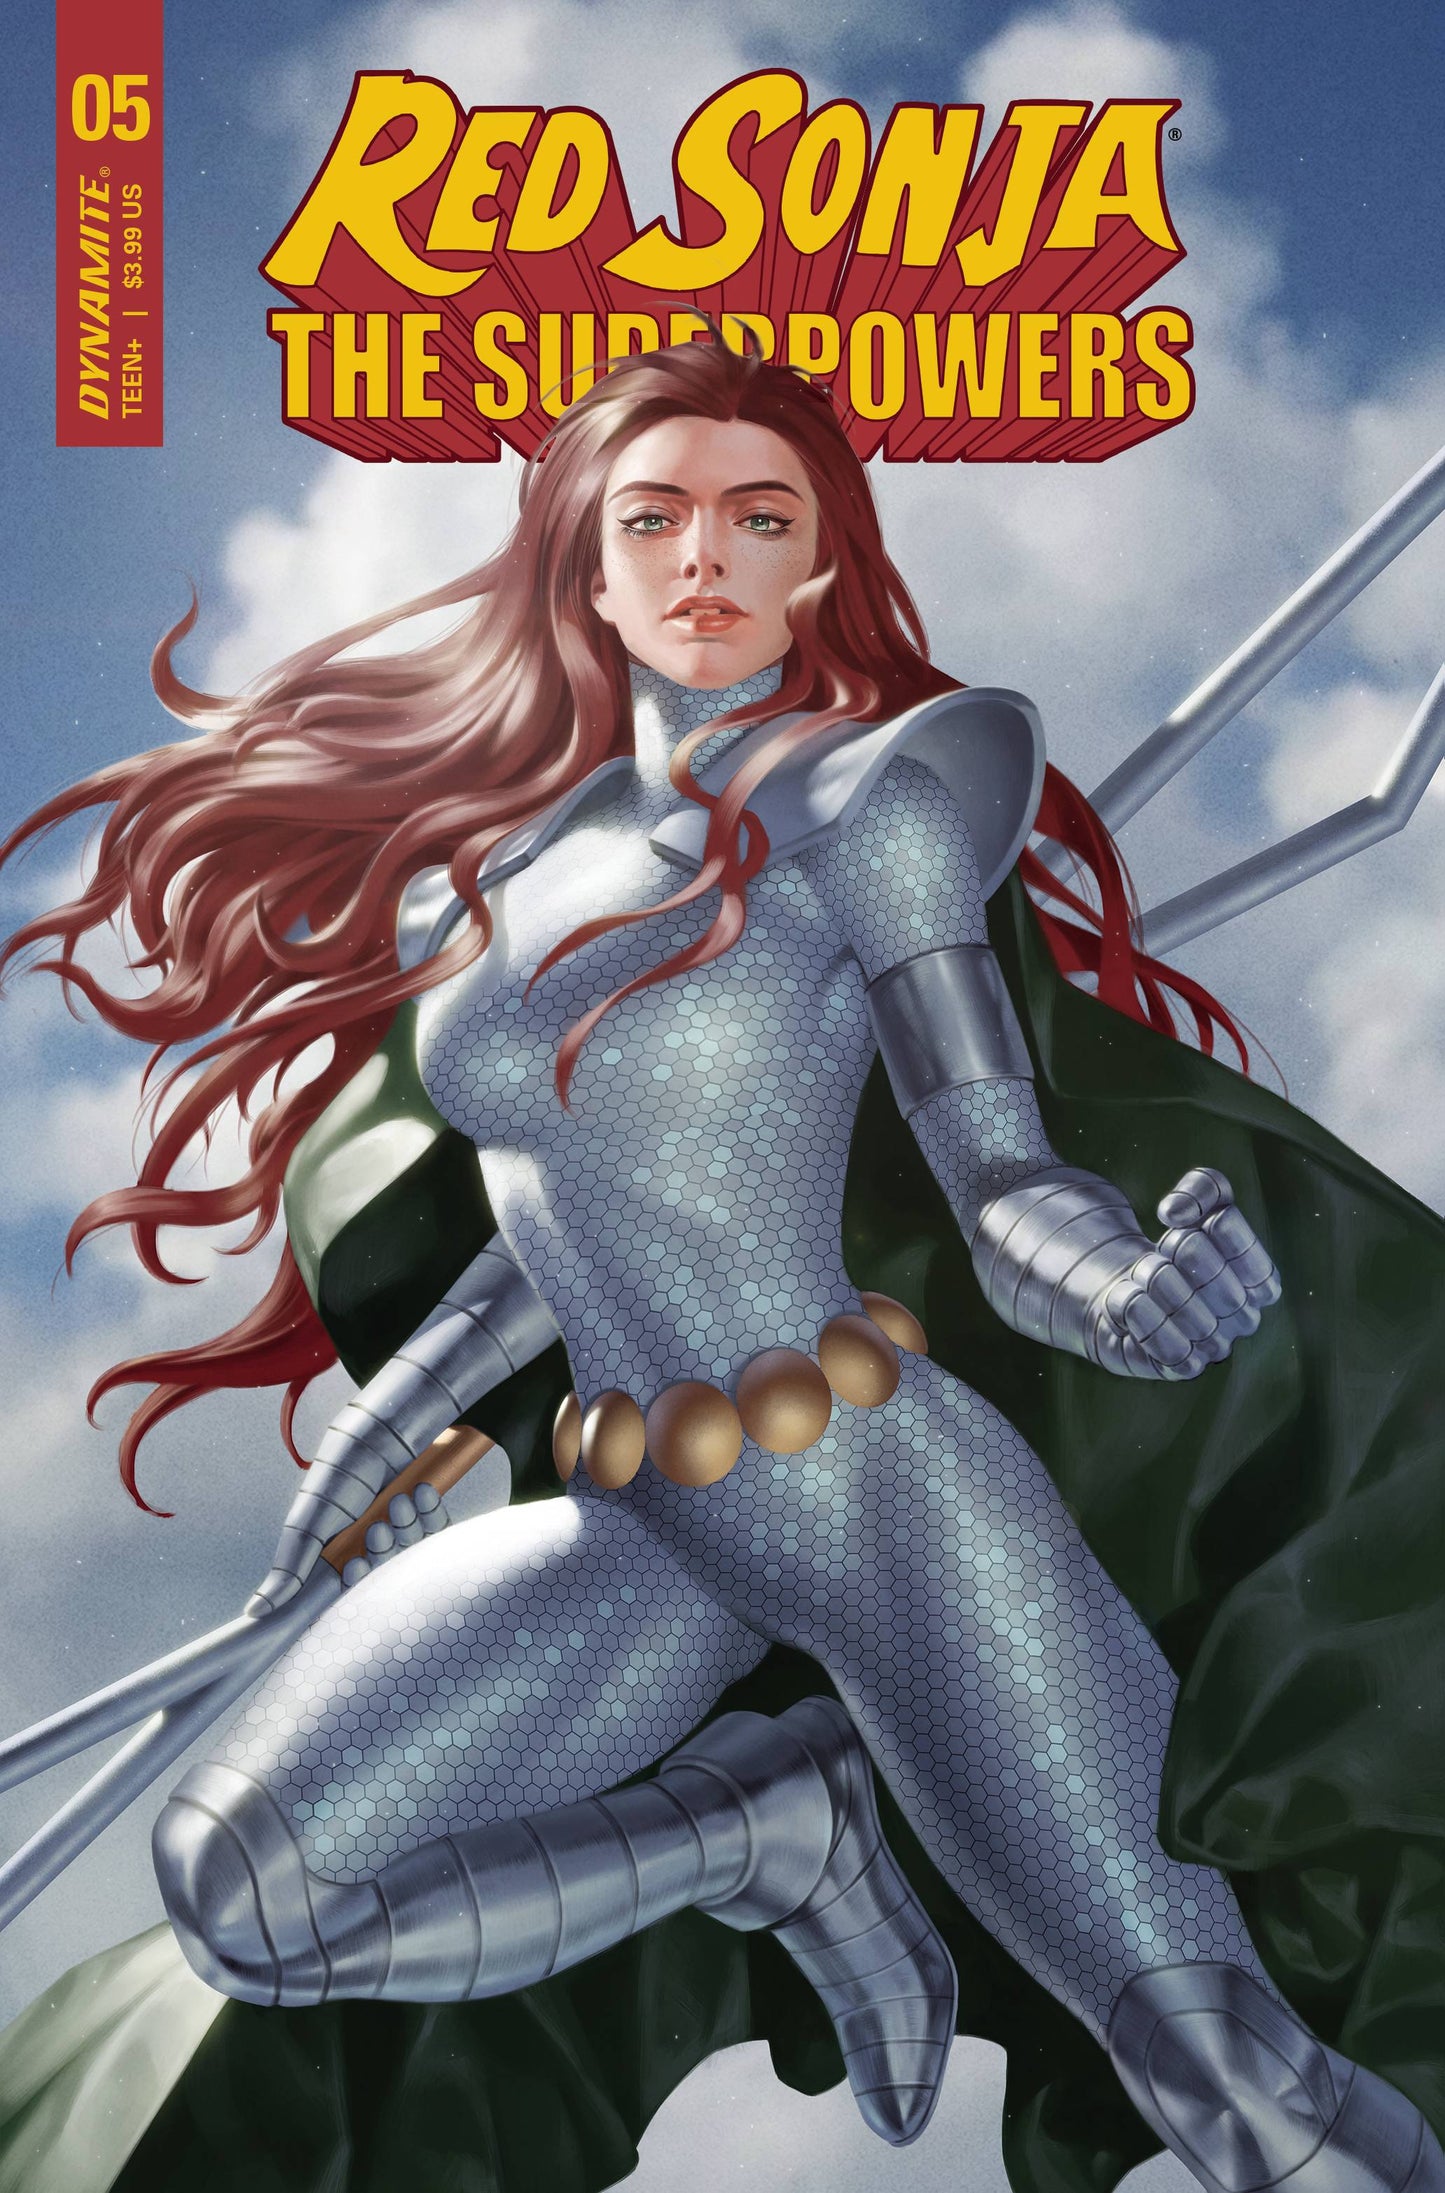 Red Sonja The Superpowers #5 B Jung-Geun Yoon (05/12/2021) Dynamite